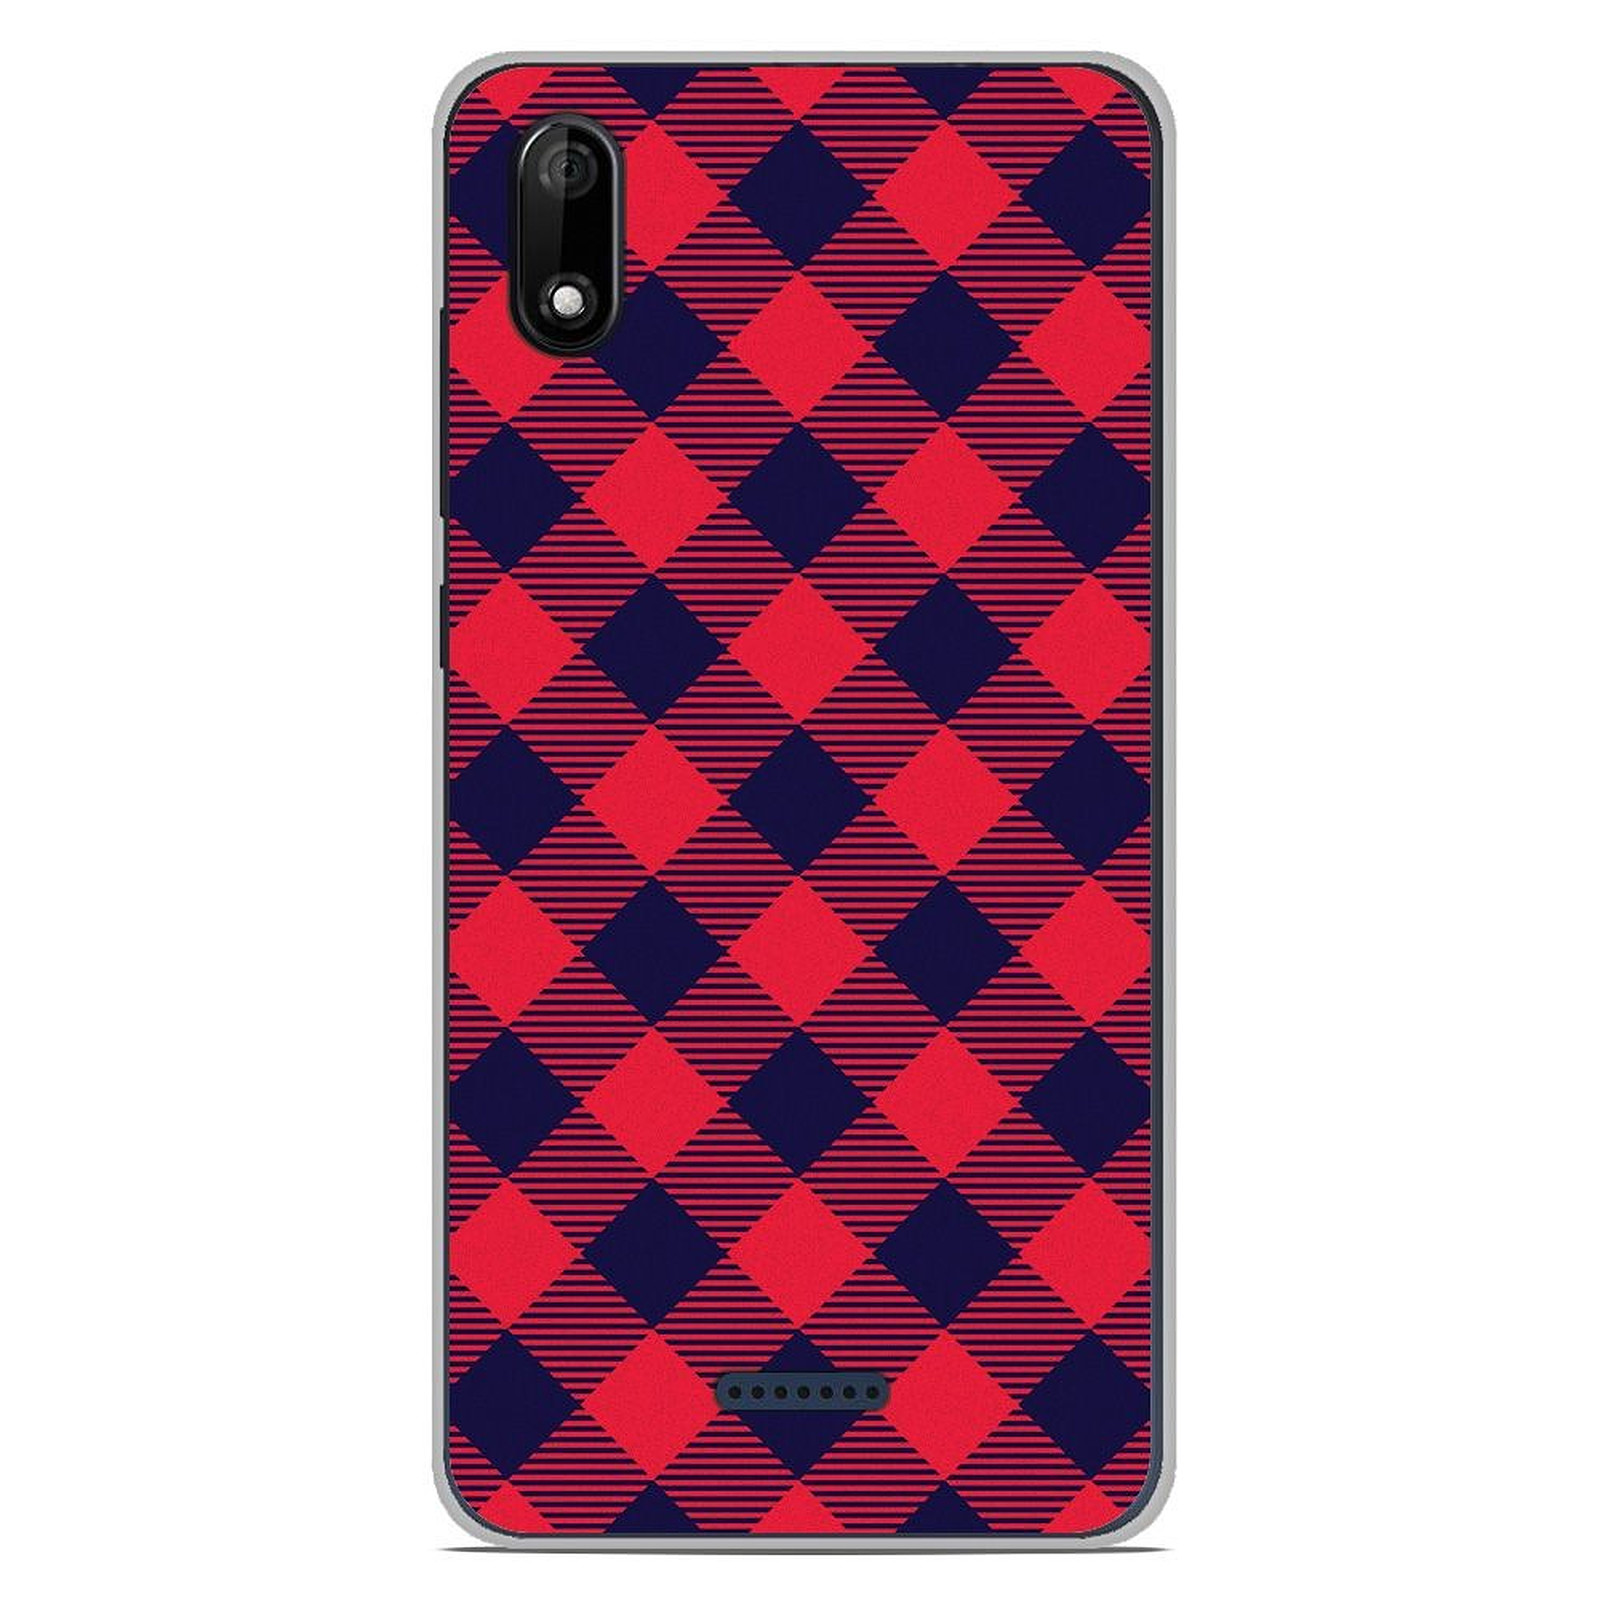 1001 Coques Coque silicone gel Wiko Y50 motif Tartan Rouge - Coque telephone 1001Coques